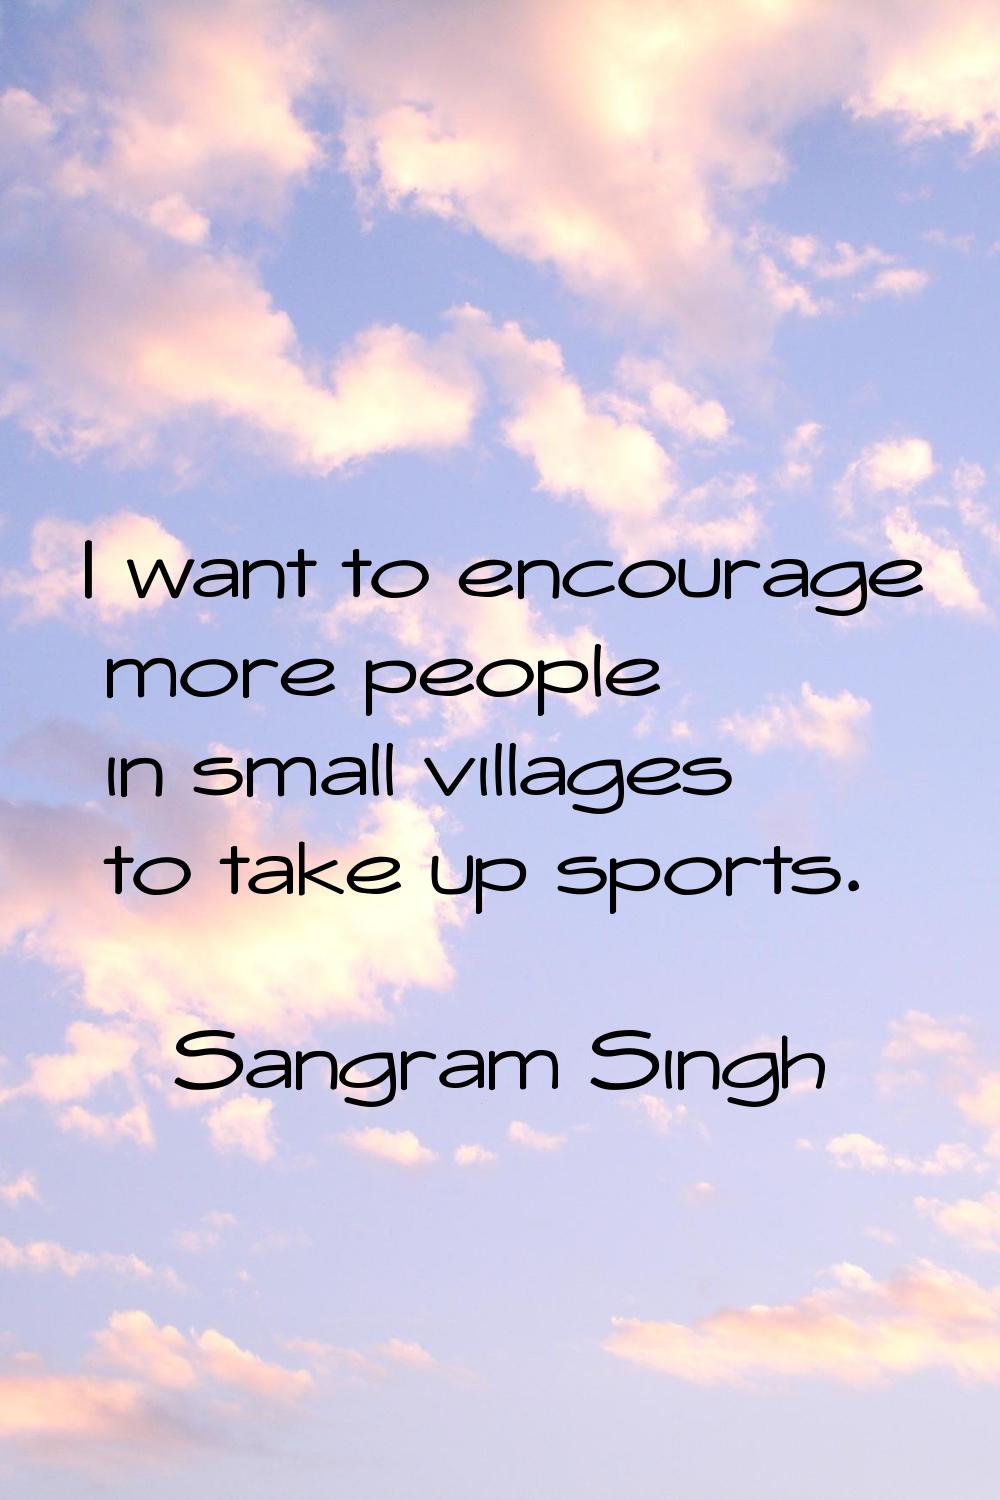 I want to encourage more people in small villages to take up sports.